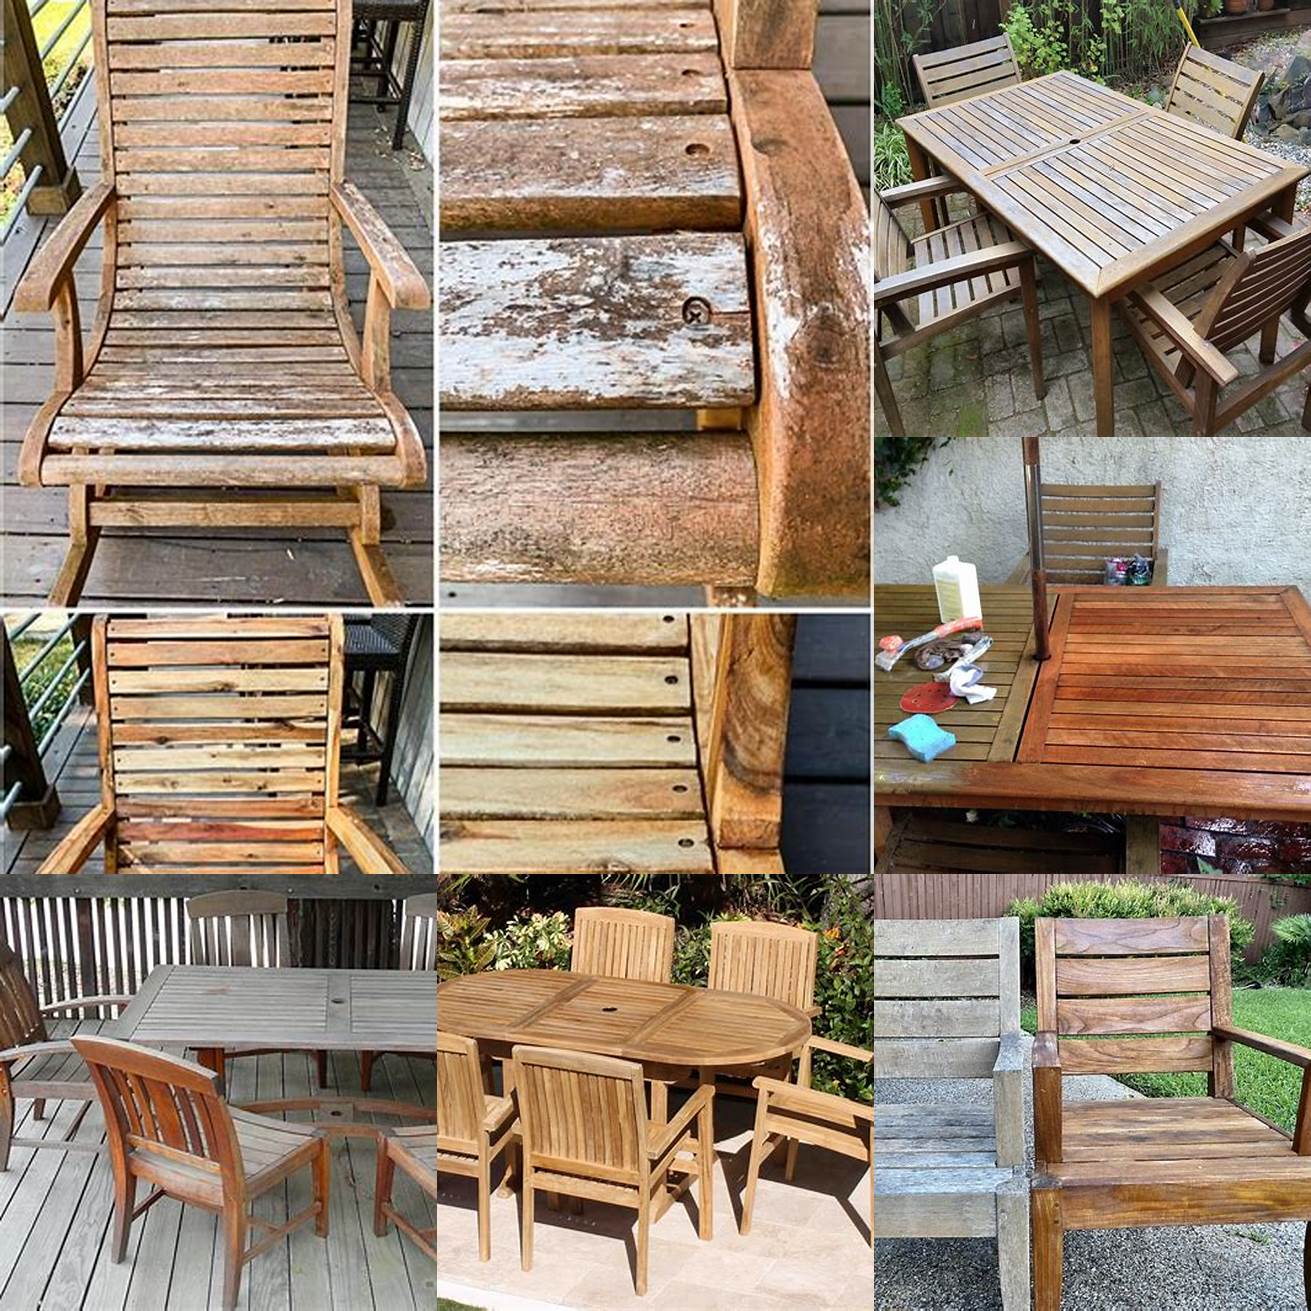 Teak outdoor furniture before and after maintenance